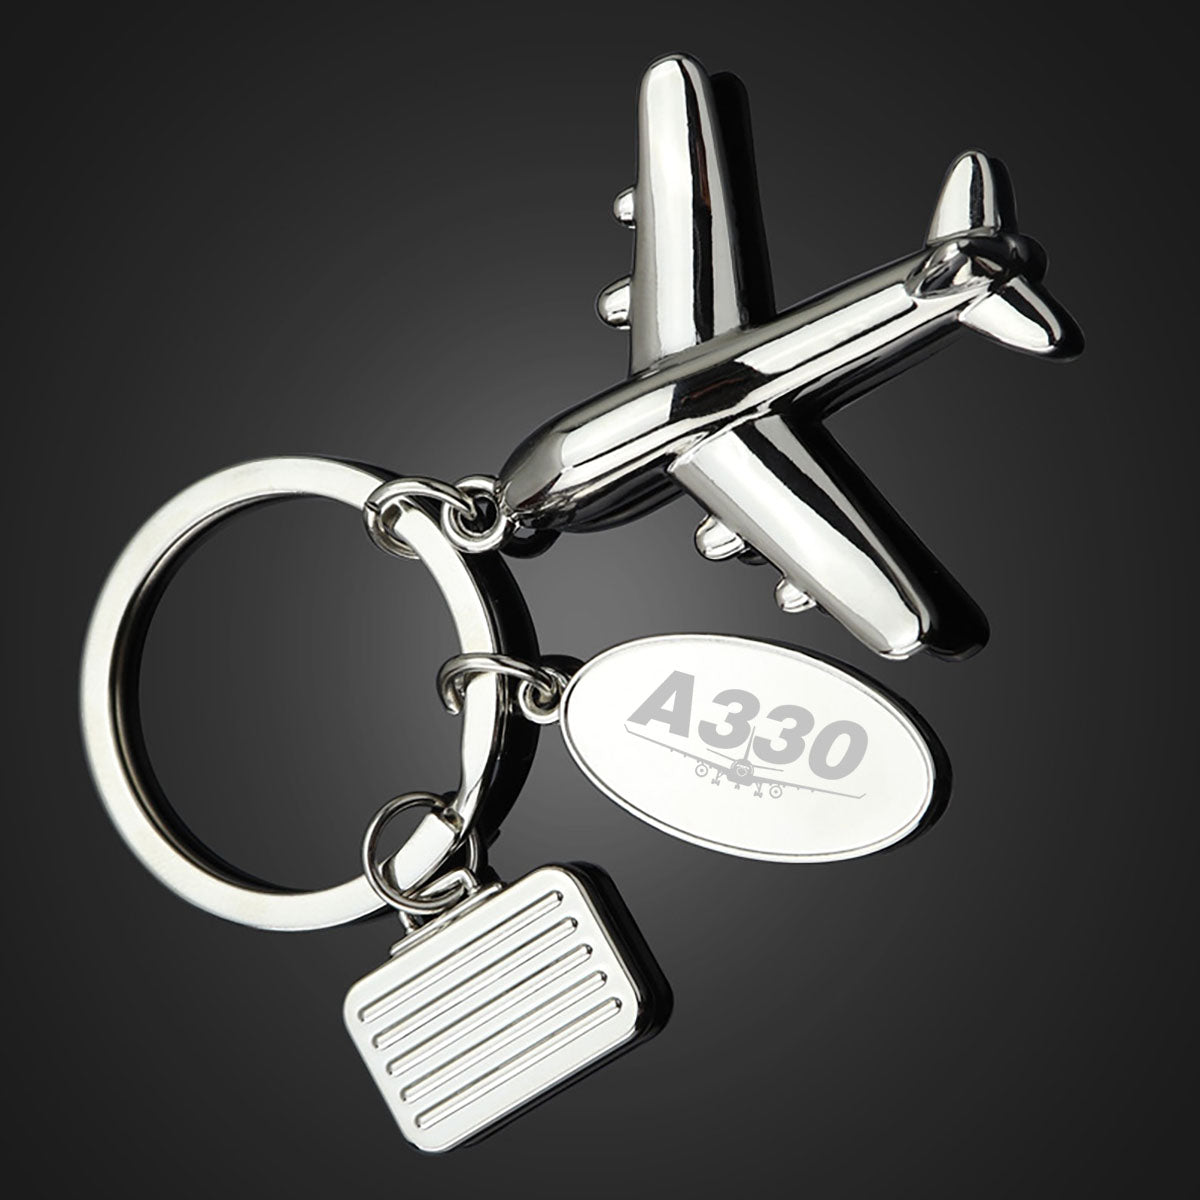 Super Airbus A330 Designed Suitcase Airplane Key Chains